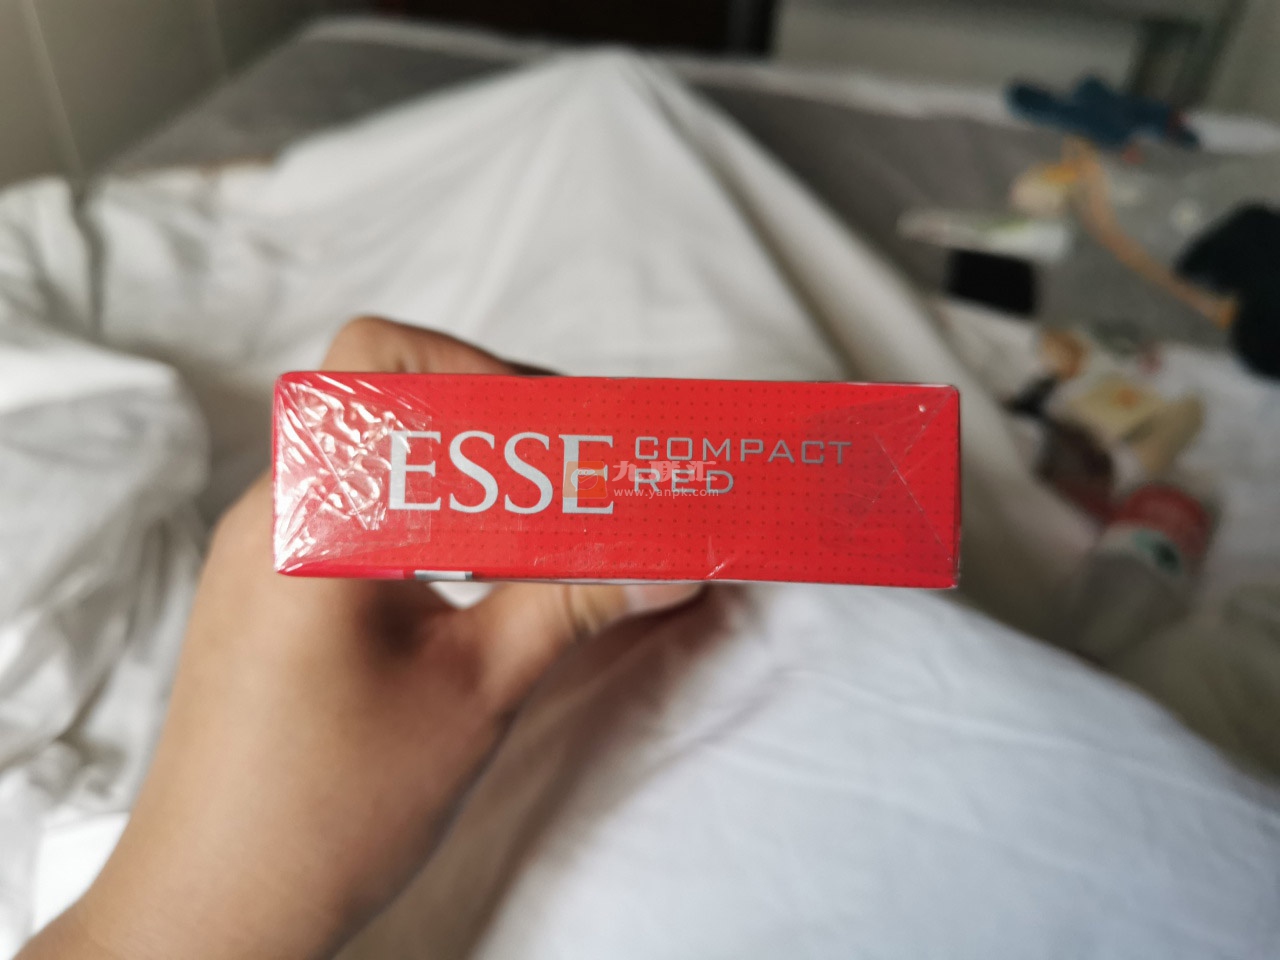 ESSE(Compact Red)相册 93036_56194